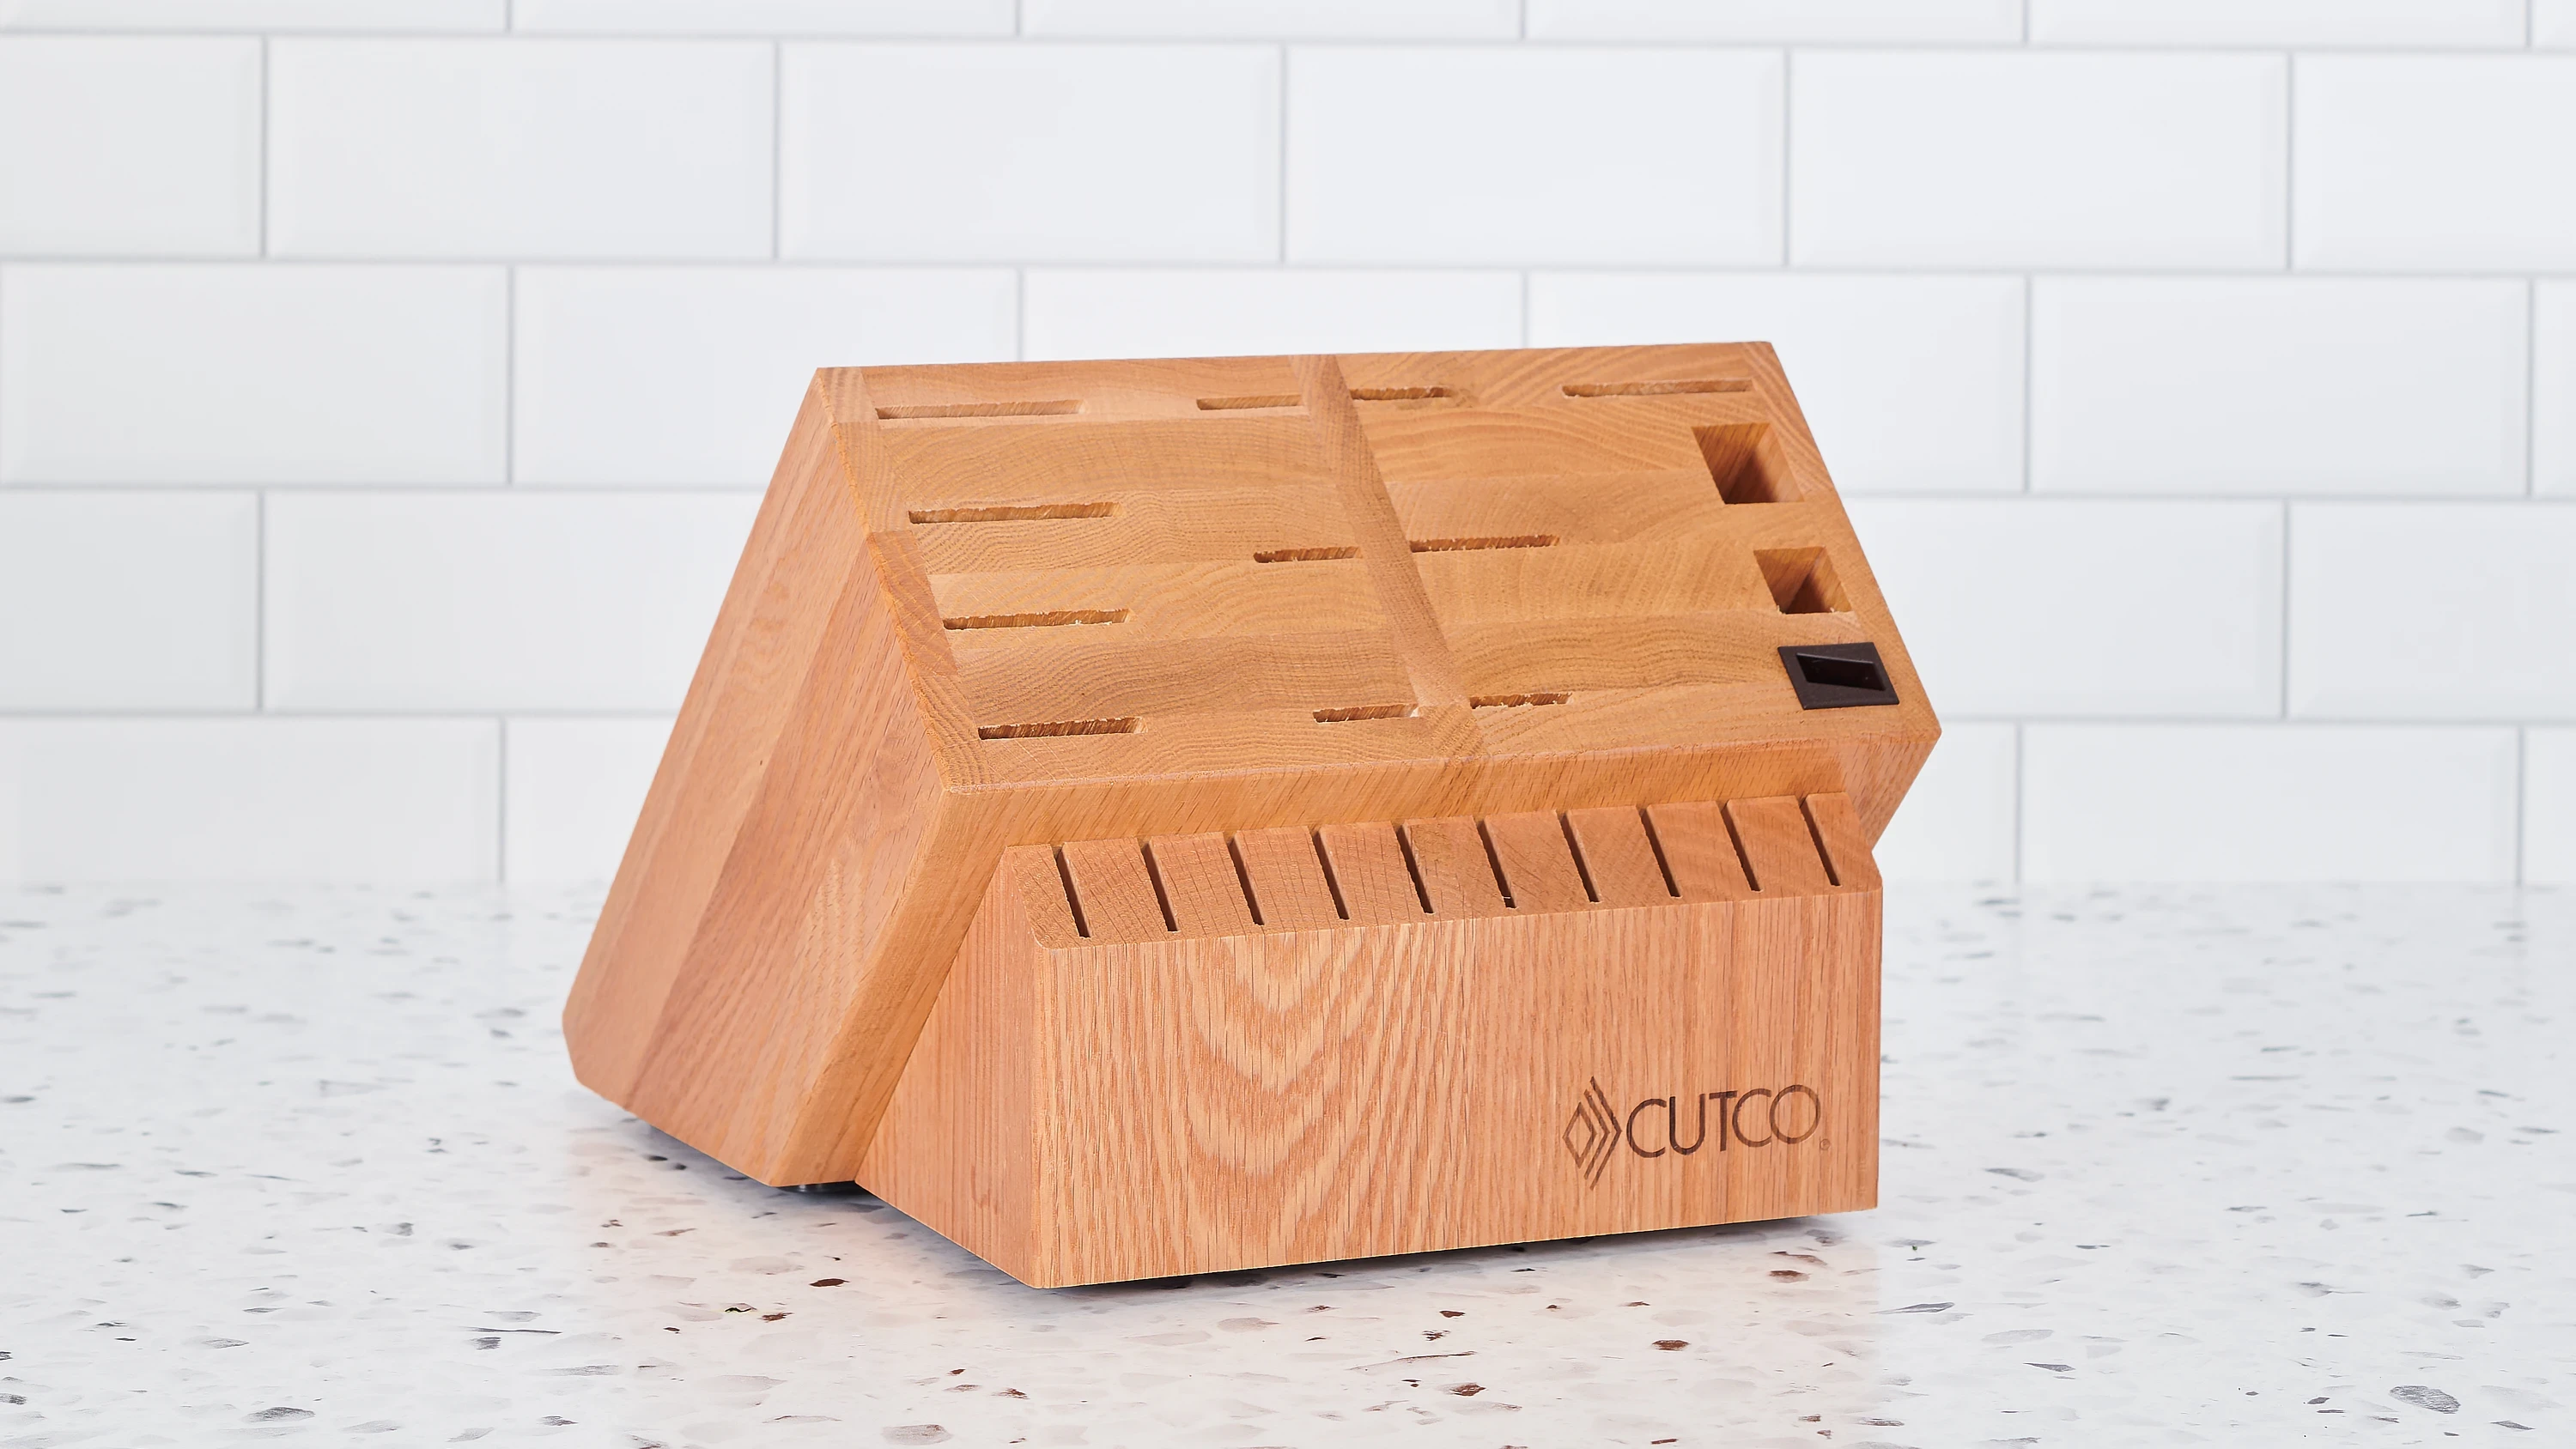 Signature Set with Block | 29 Pieces | Knife Block Sets by Cutco